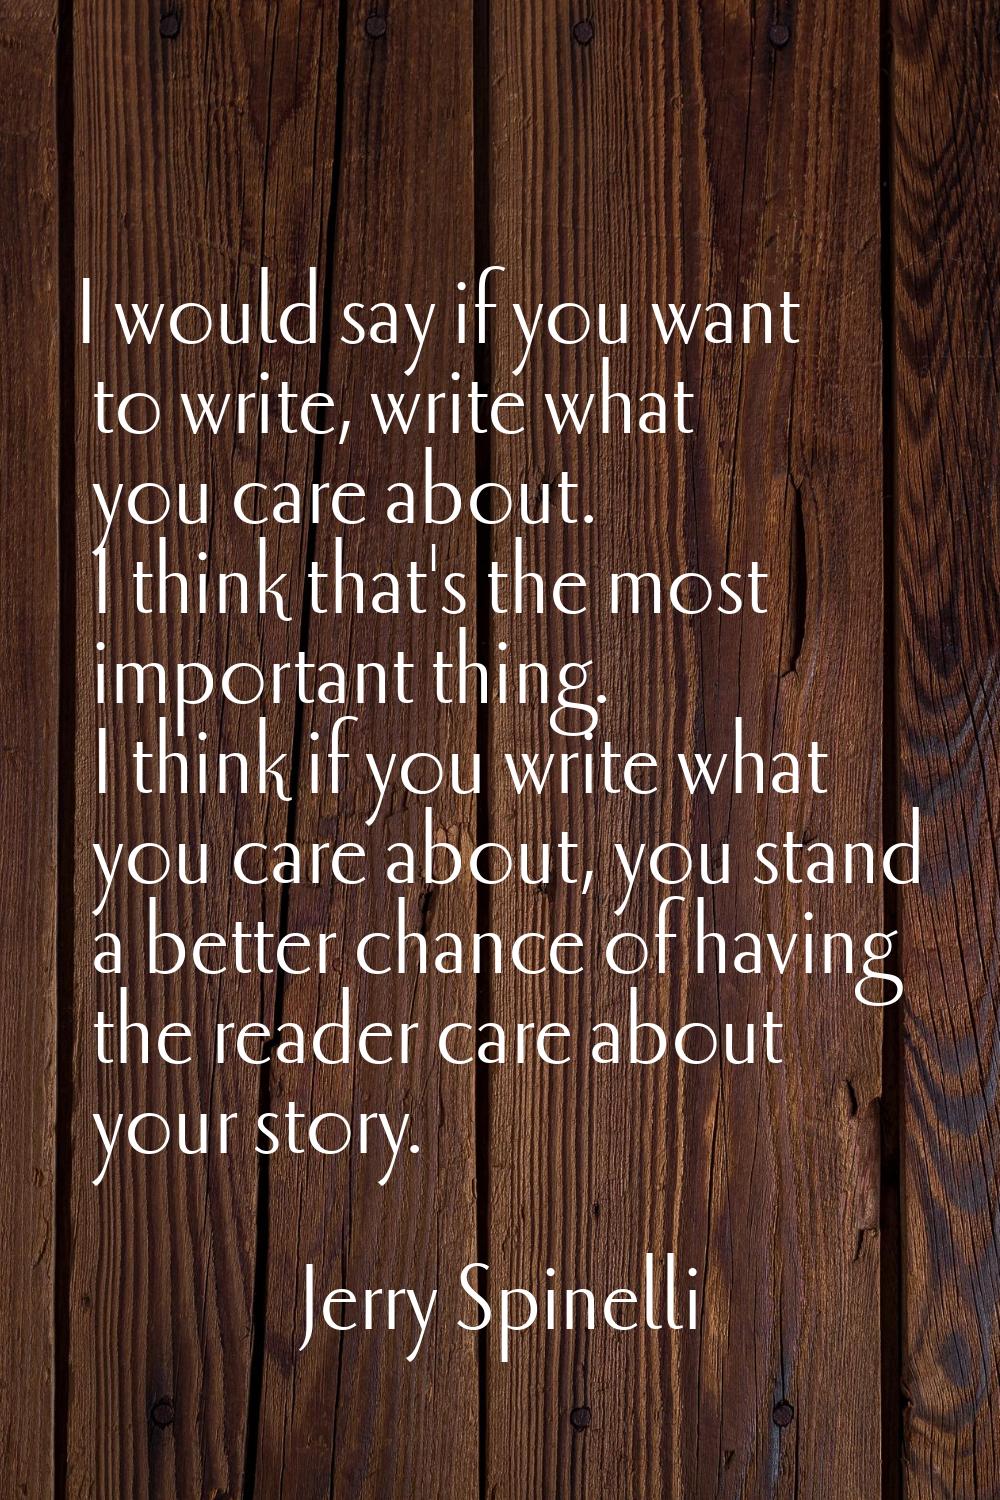 I would say if you want to write, write what you care about. I think that's the most important thin